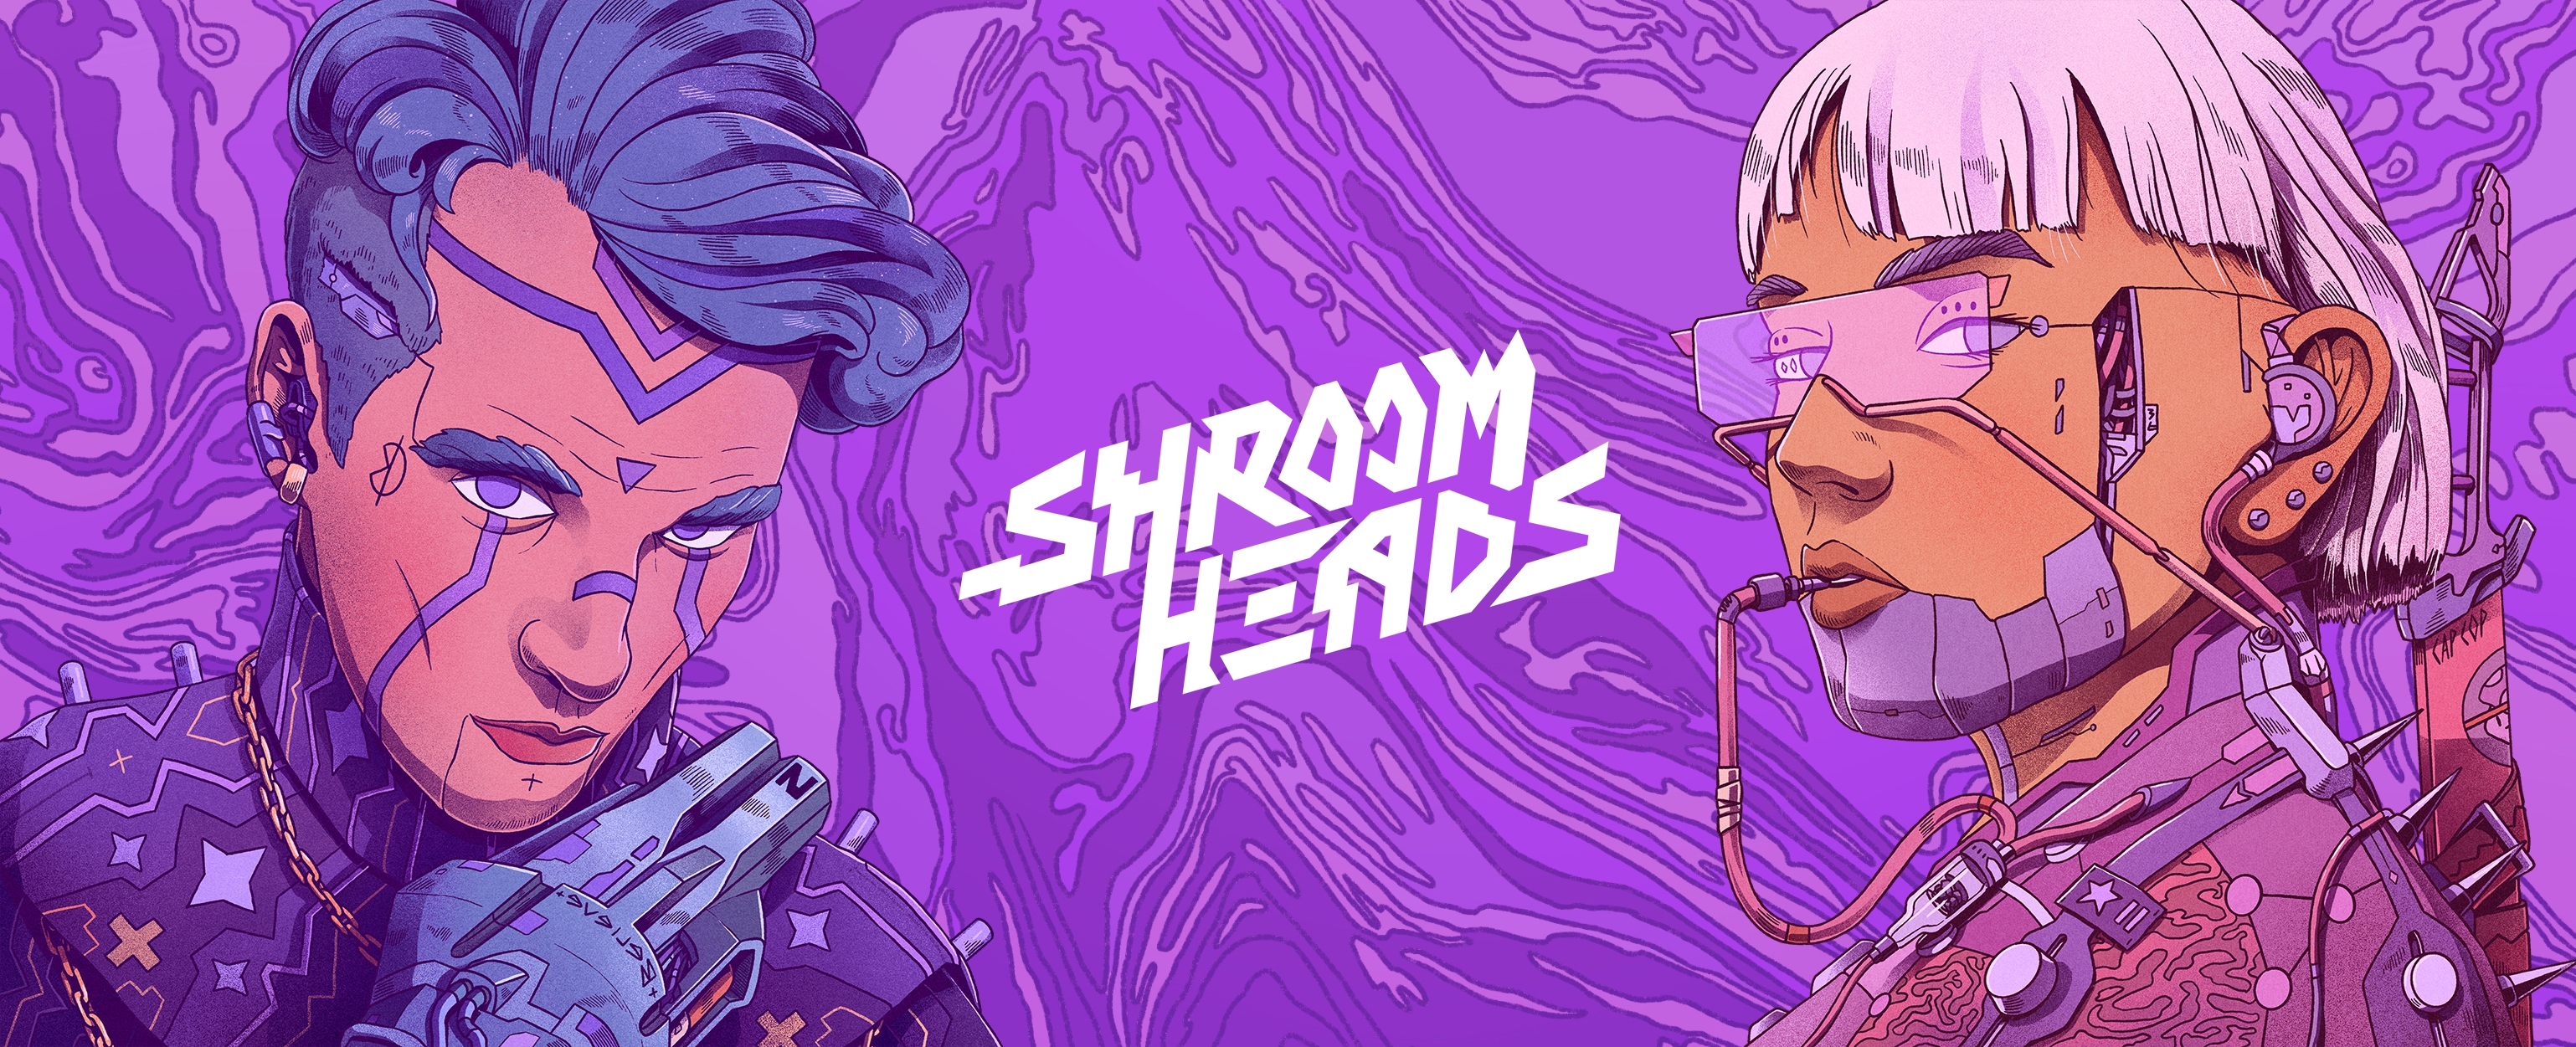 Shroomheads Factions banner